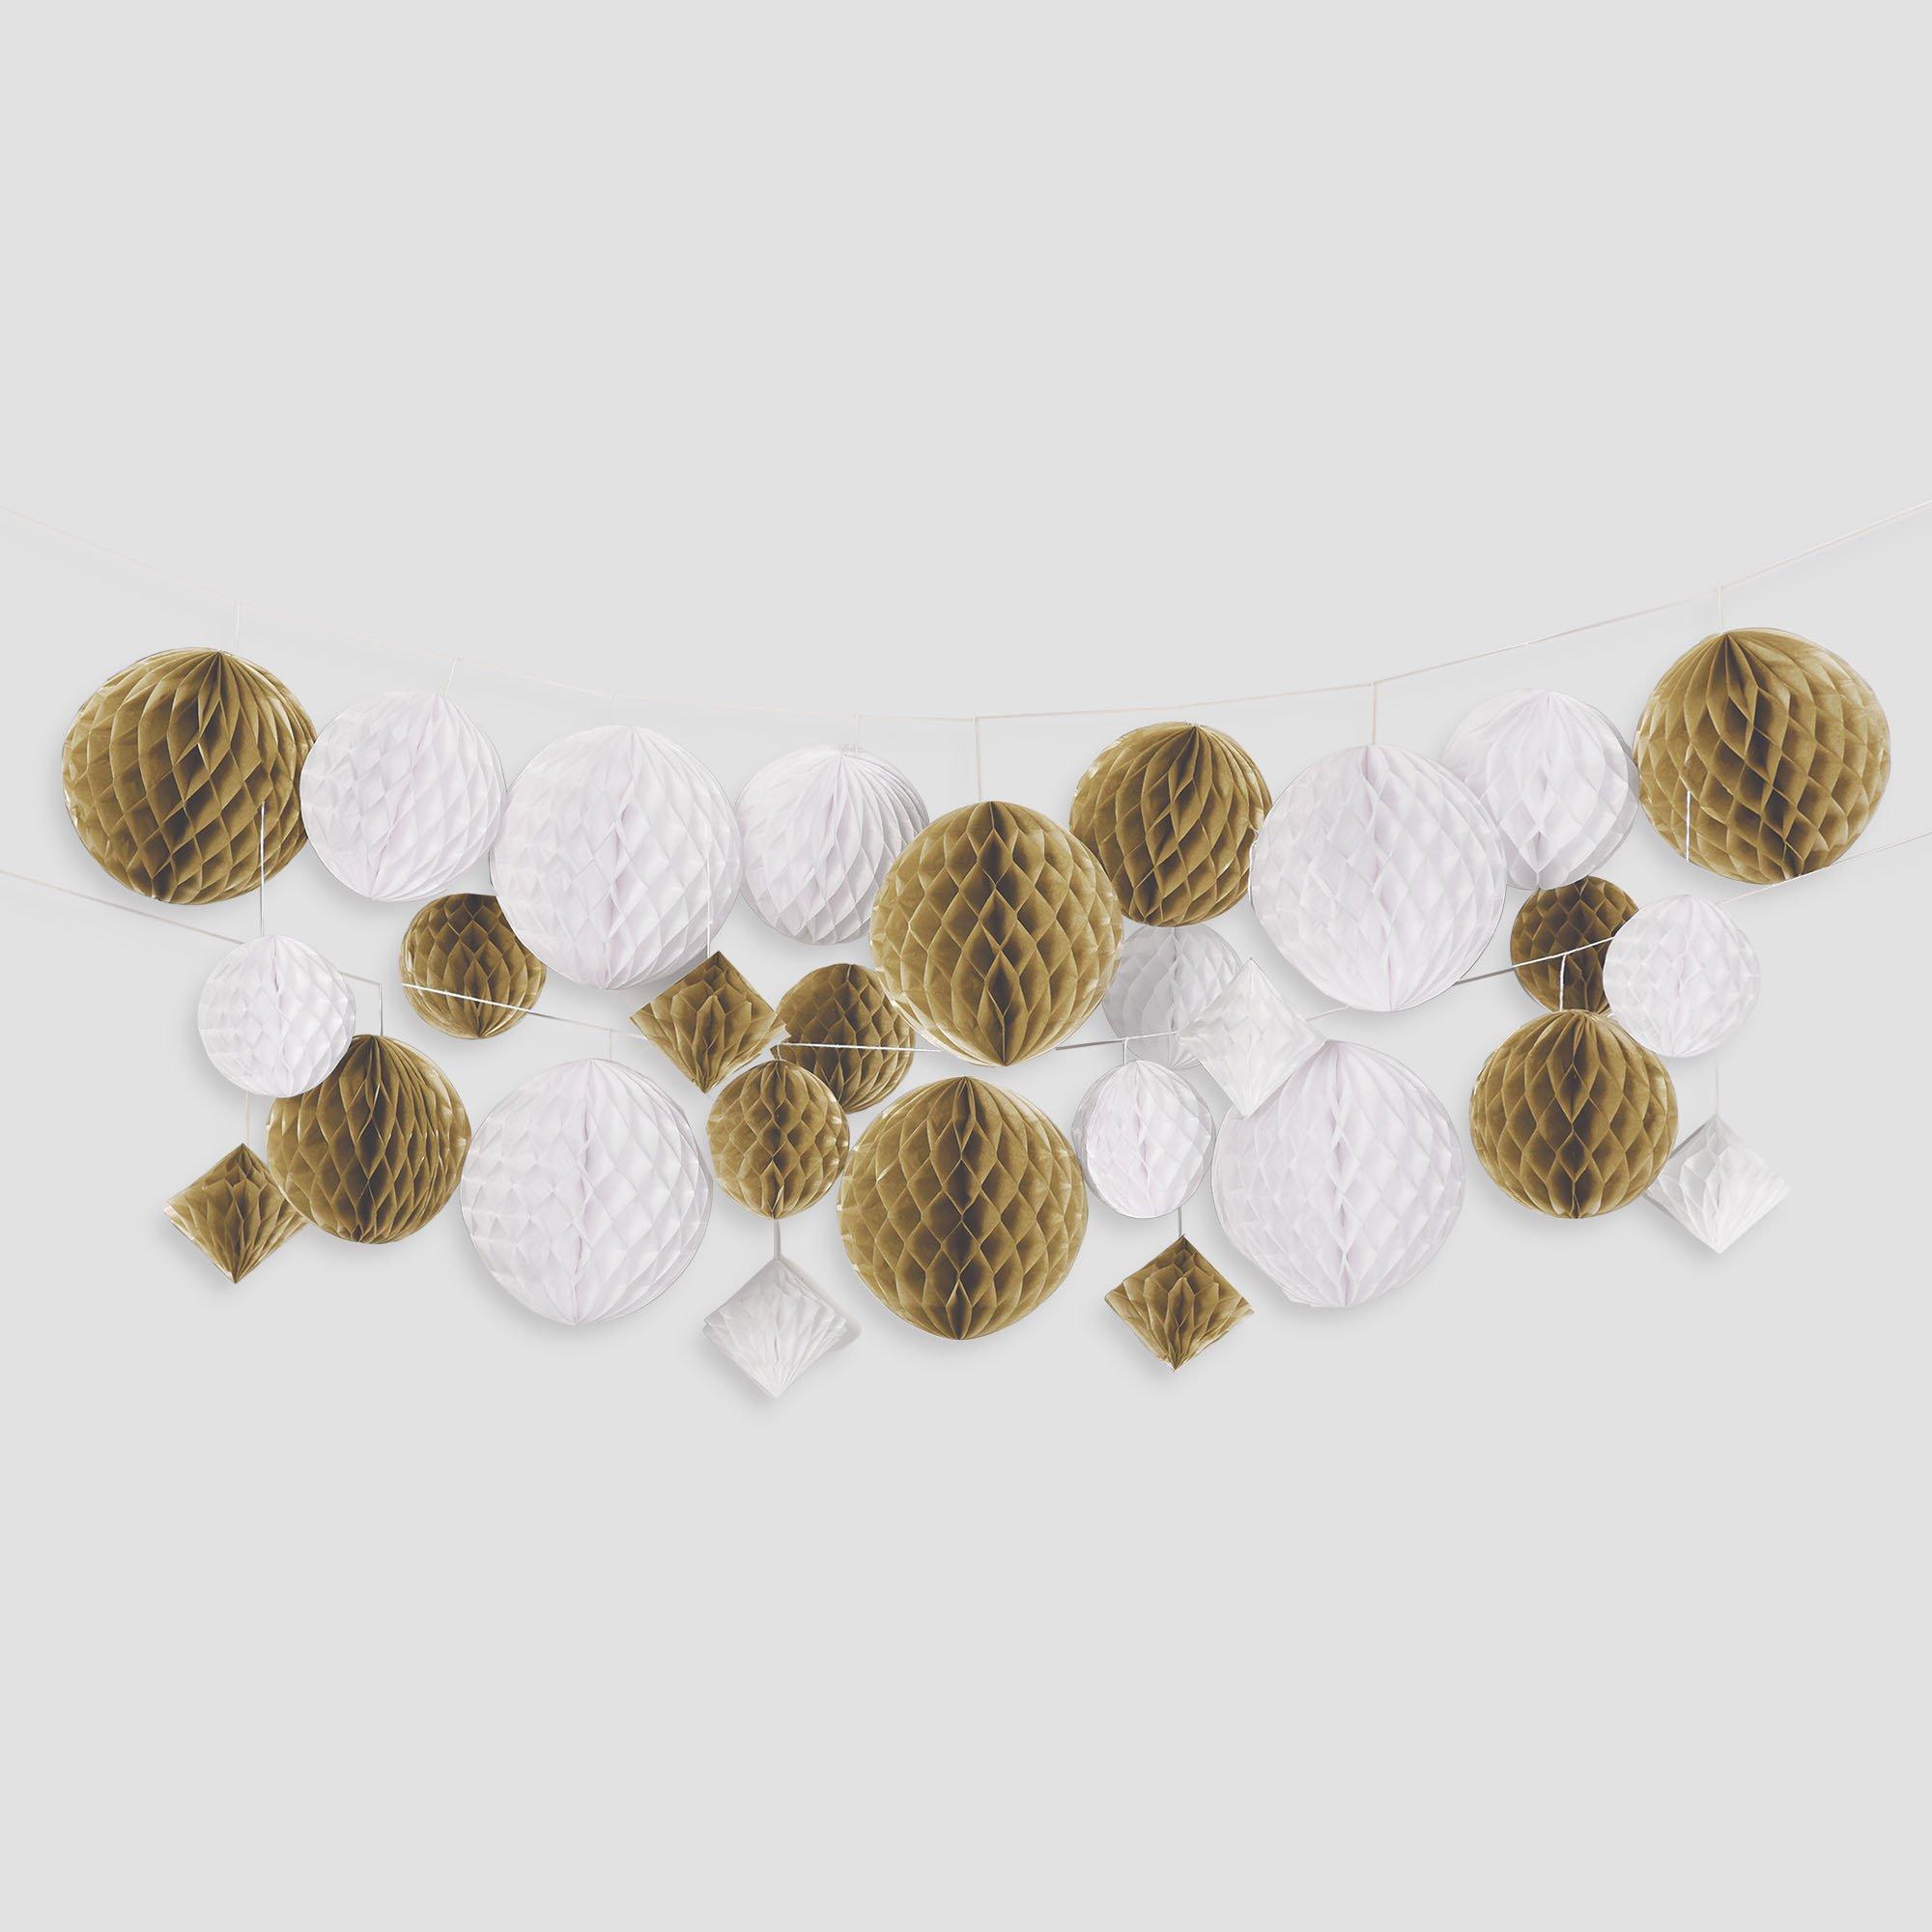 3 White Gold Honeycomb Paper Diamond Rings Wall Hanging Decorations